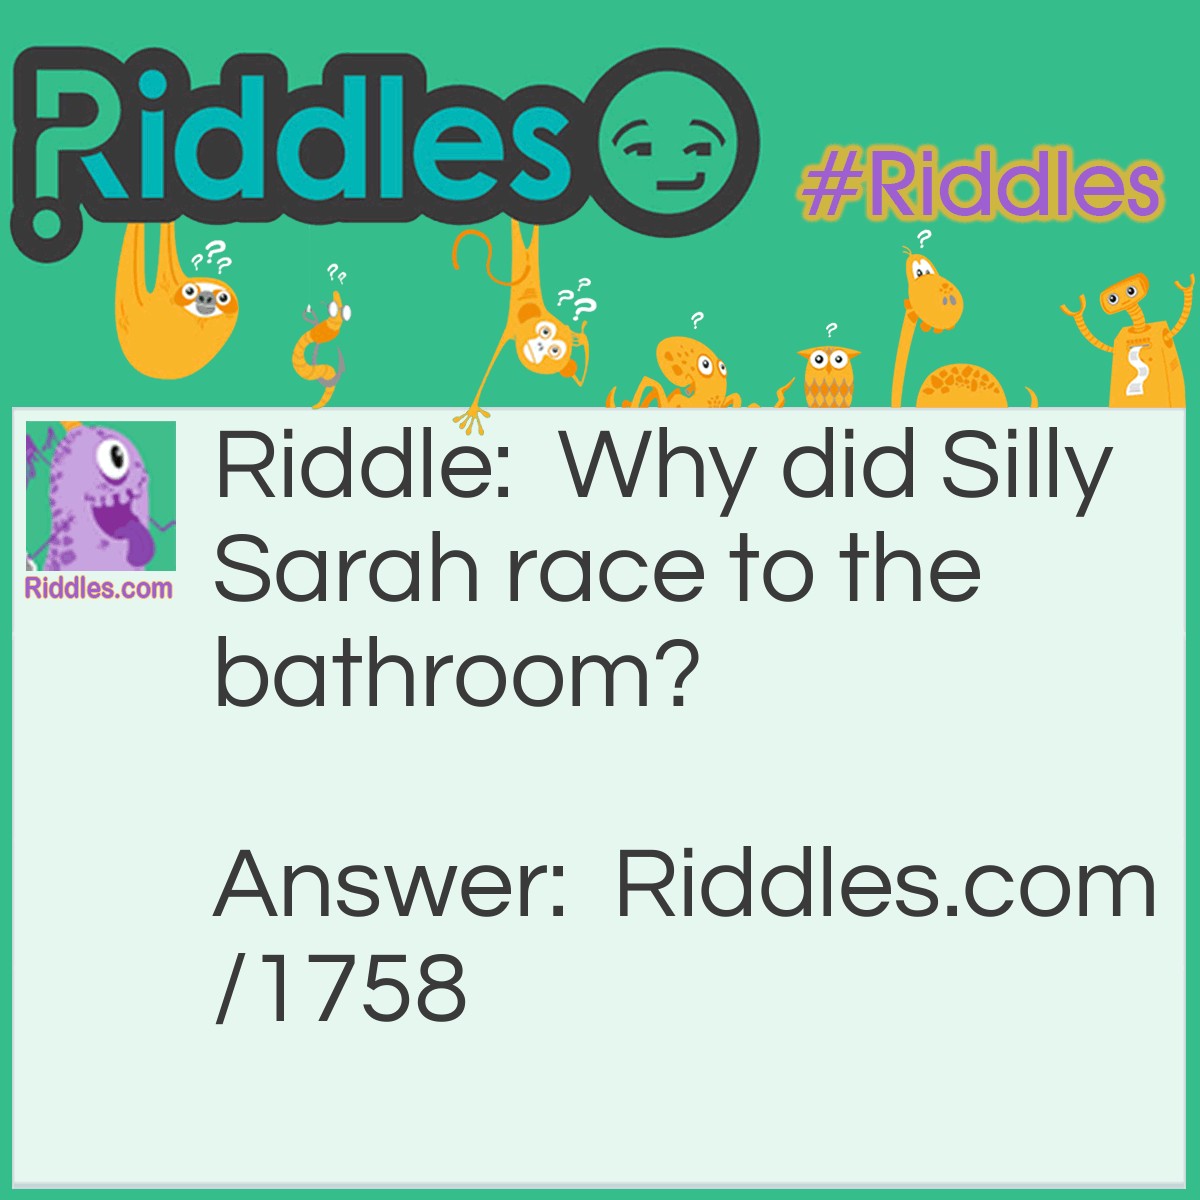 Riddle: Why did Silly Sarah race to the bathroom? Answer: Her boyfriend told her he'd left a ring in the tub.